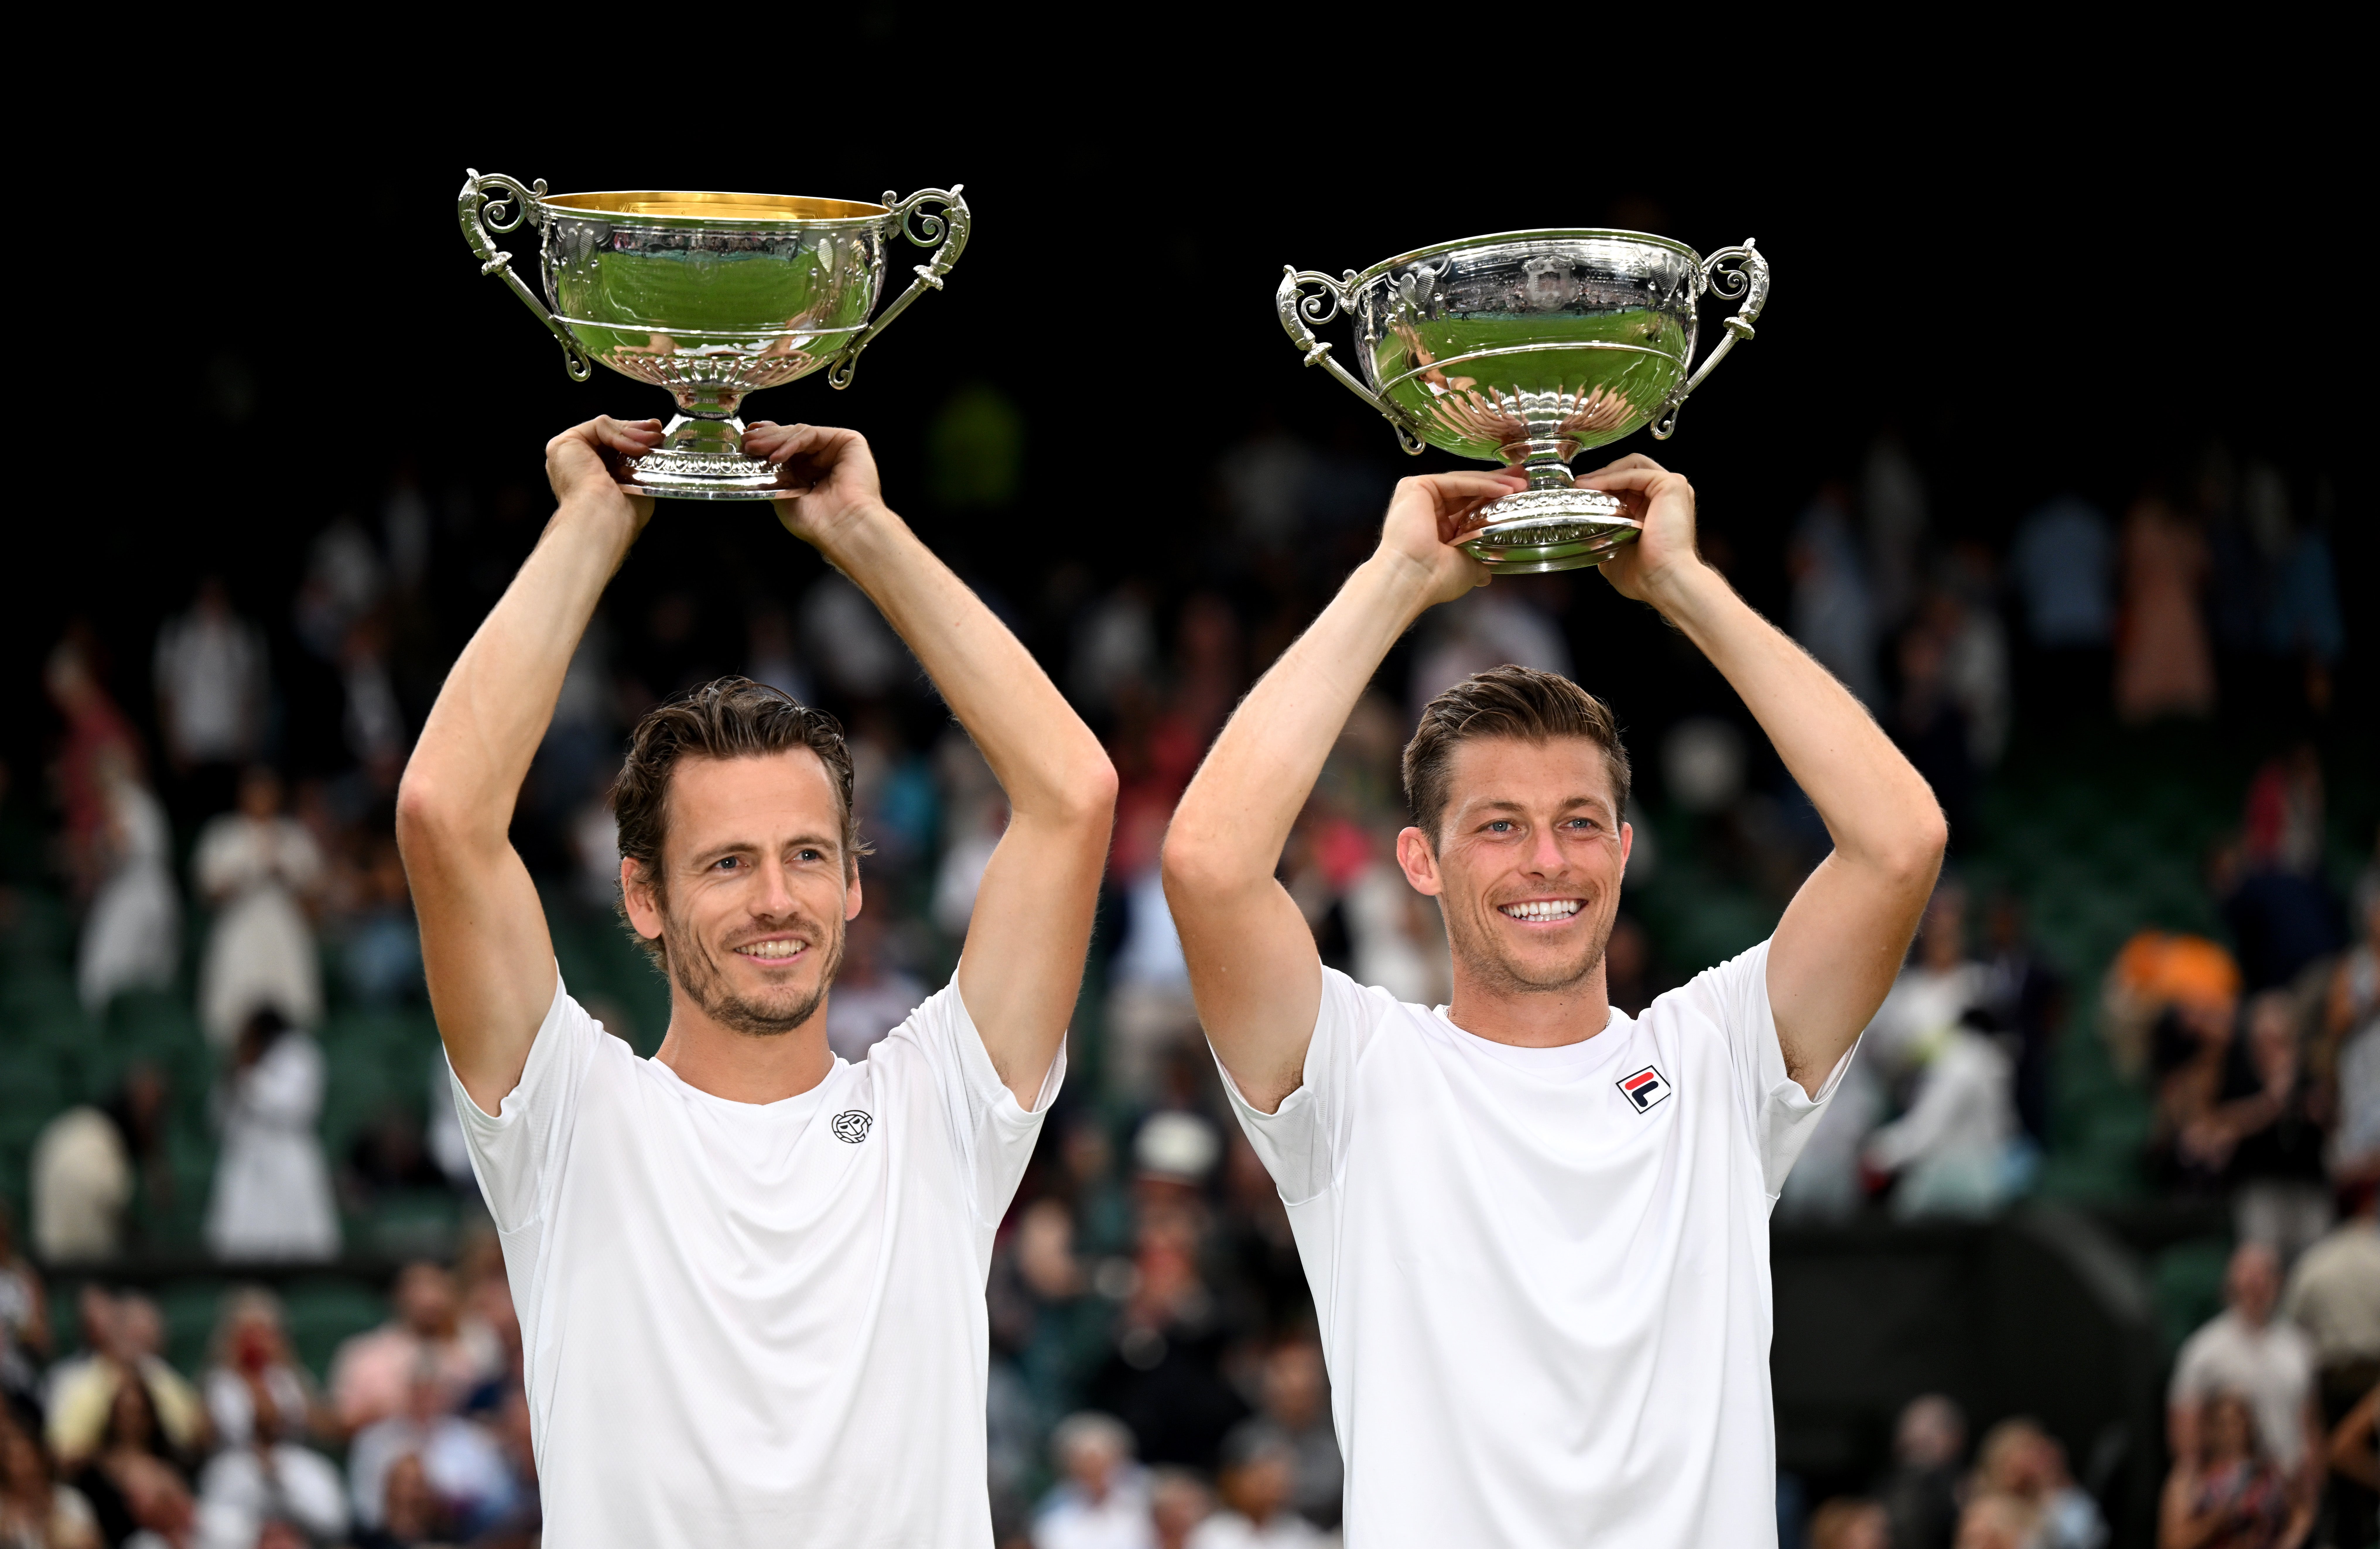 Neal Skupski (R) claimed his first Grand Slam men’s doubles title with victory at Wimbledon with Dutch partner Wesley Koolhof (L)